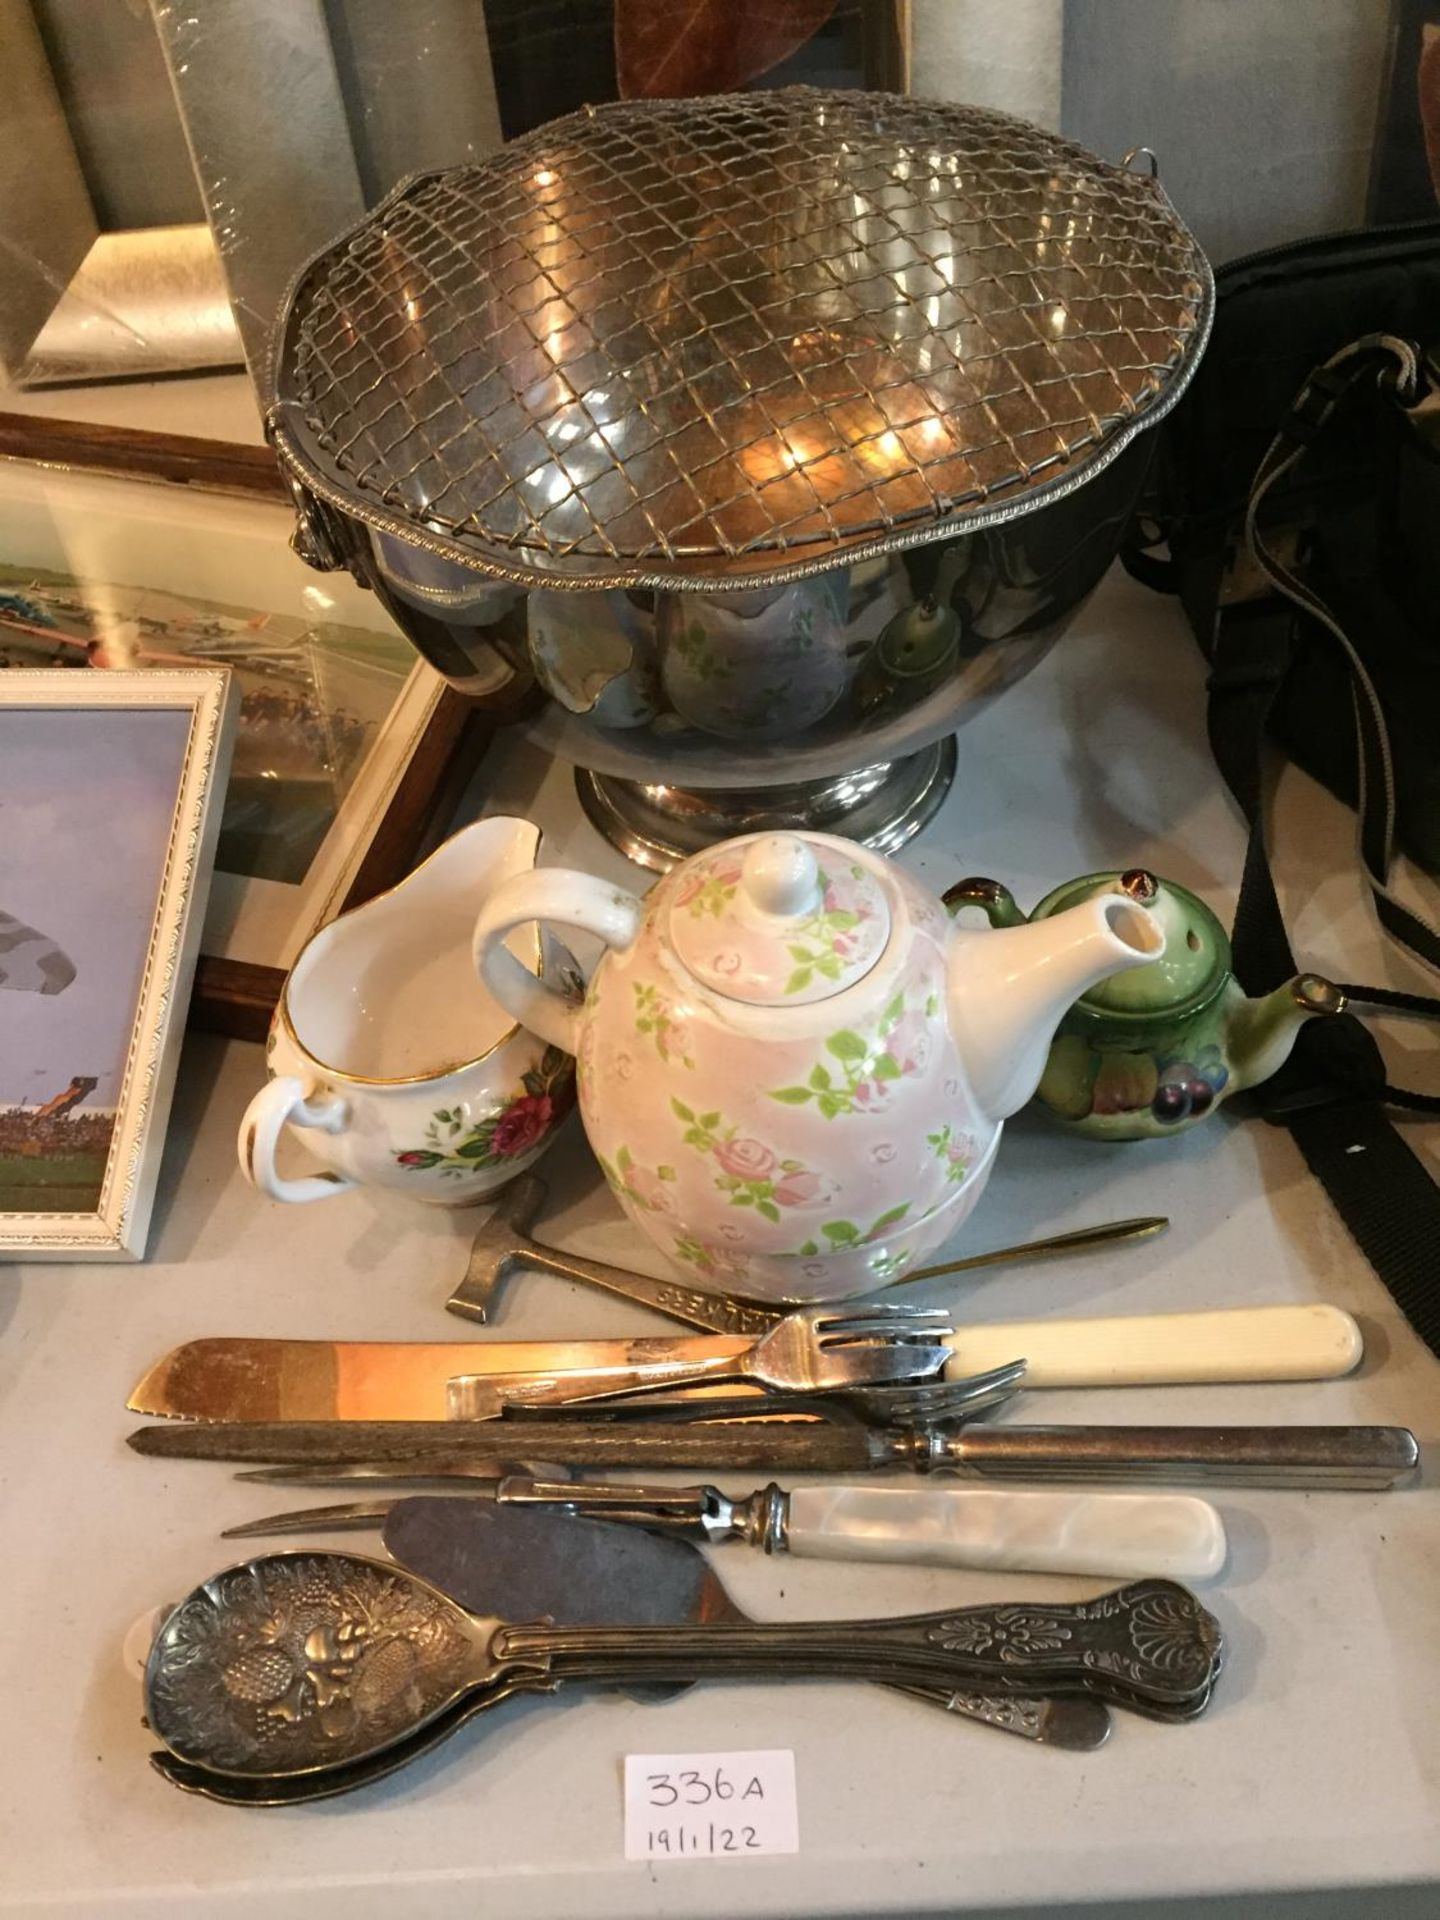 A LARGE SILVER PLATE ROSE BOWL, A TEA FOR ONE TEAPOT, SERVING SPOON AND FORK WITH FRUIT